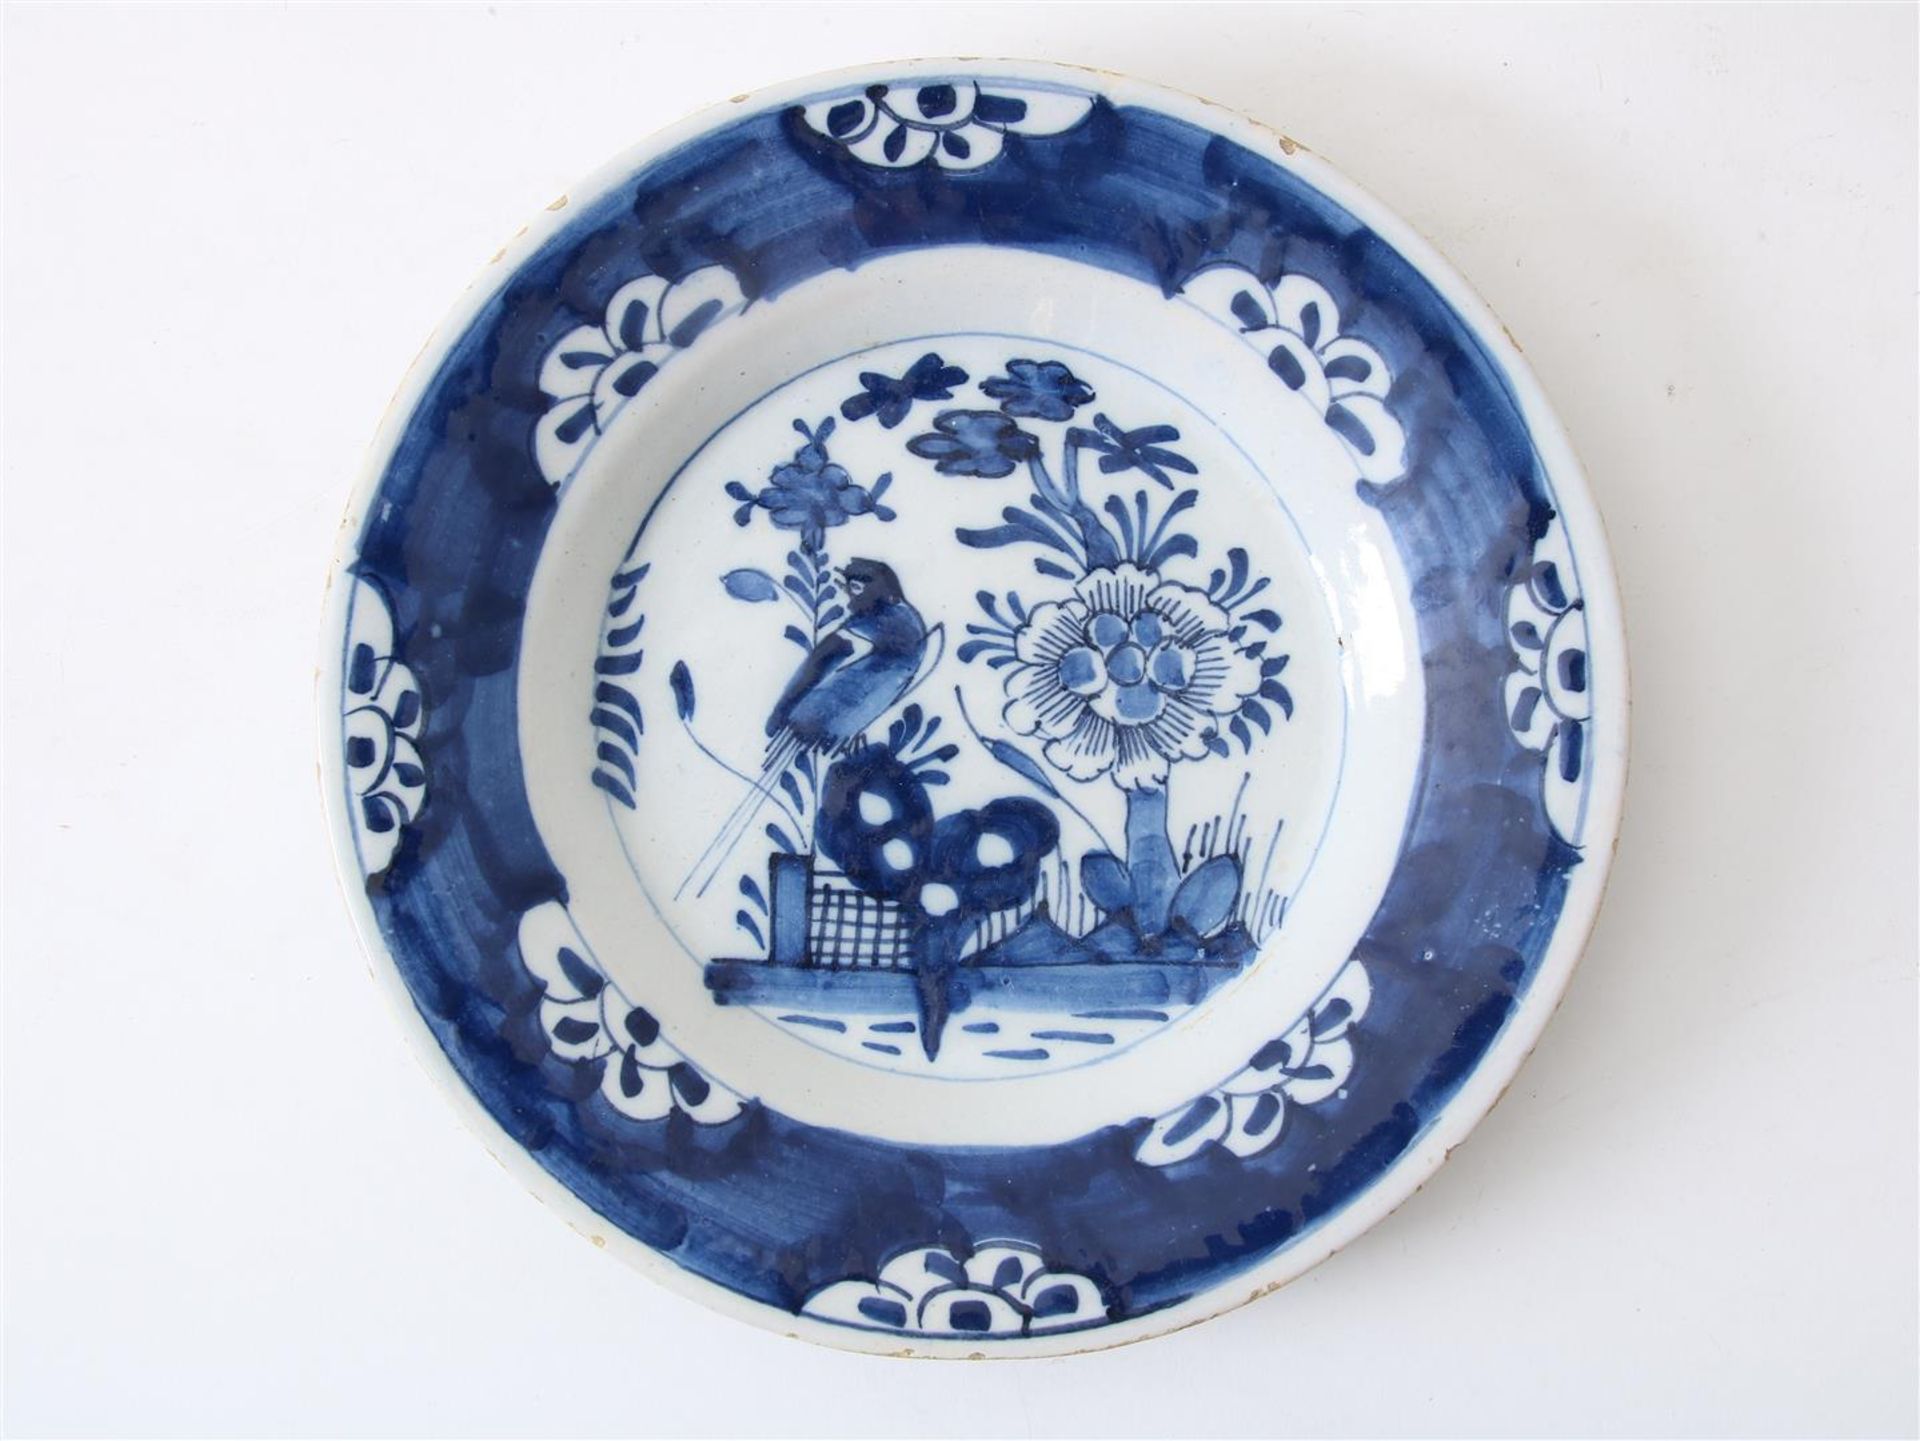 Lot consisting of: plate with polychrome floral decor and text in two hearts: "There is nothing - Image 5 of 7